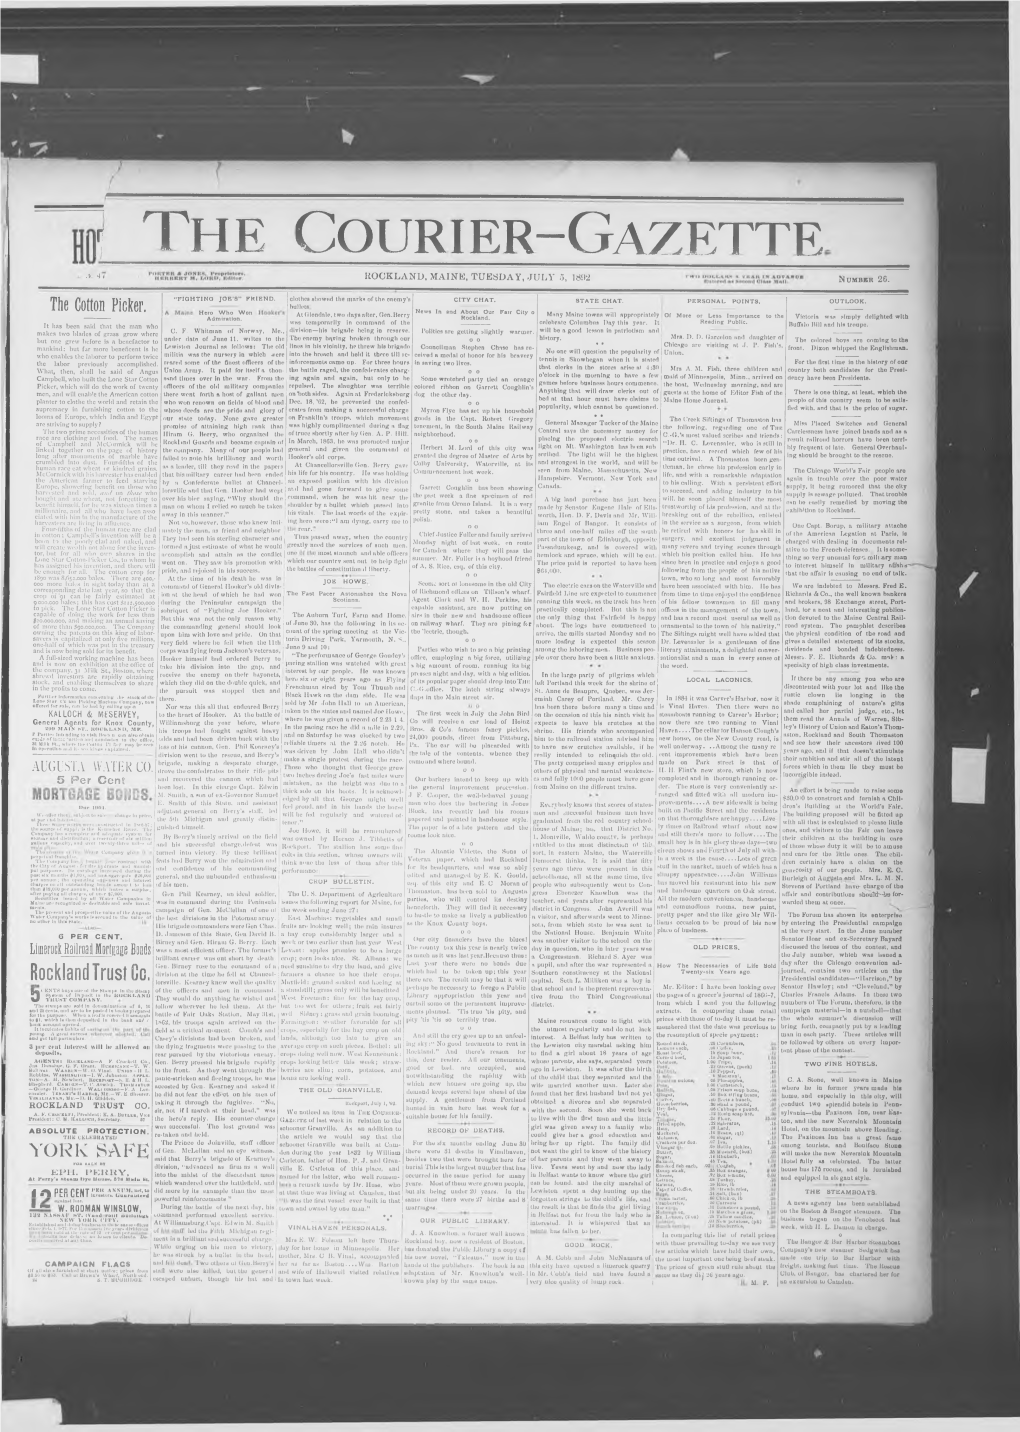 Courier Gazette: Tuesday, July 5,1892